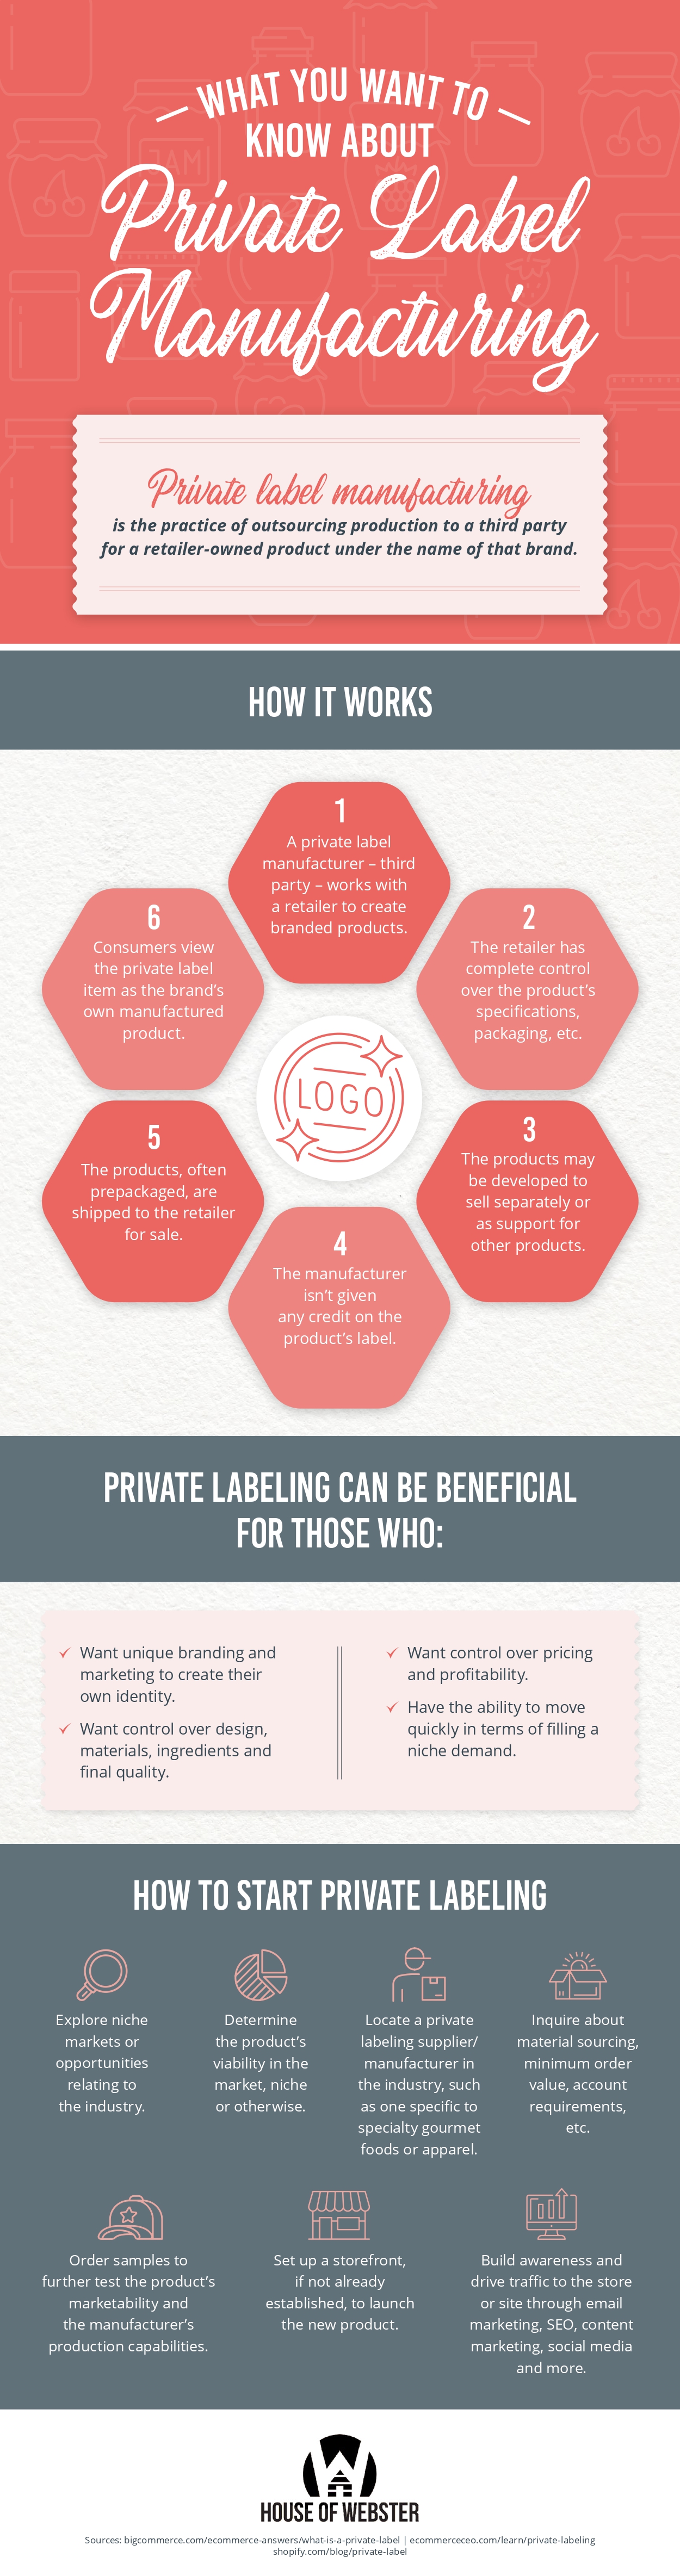 private label food companies